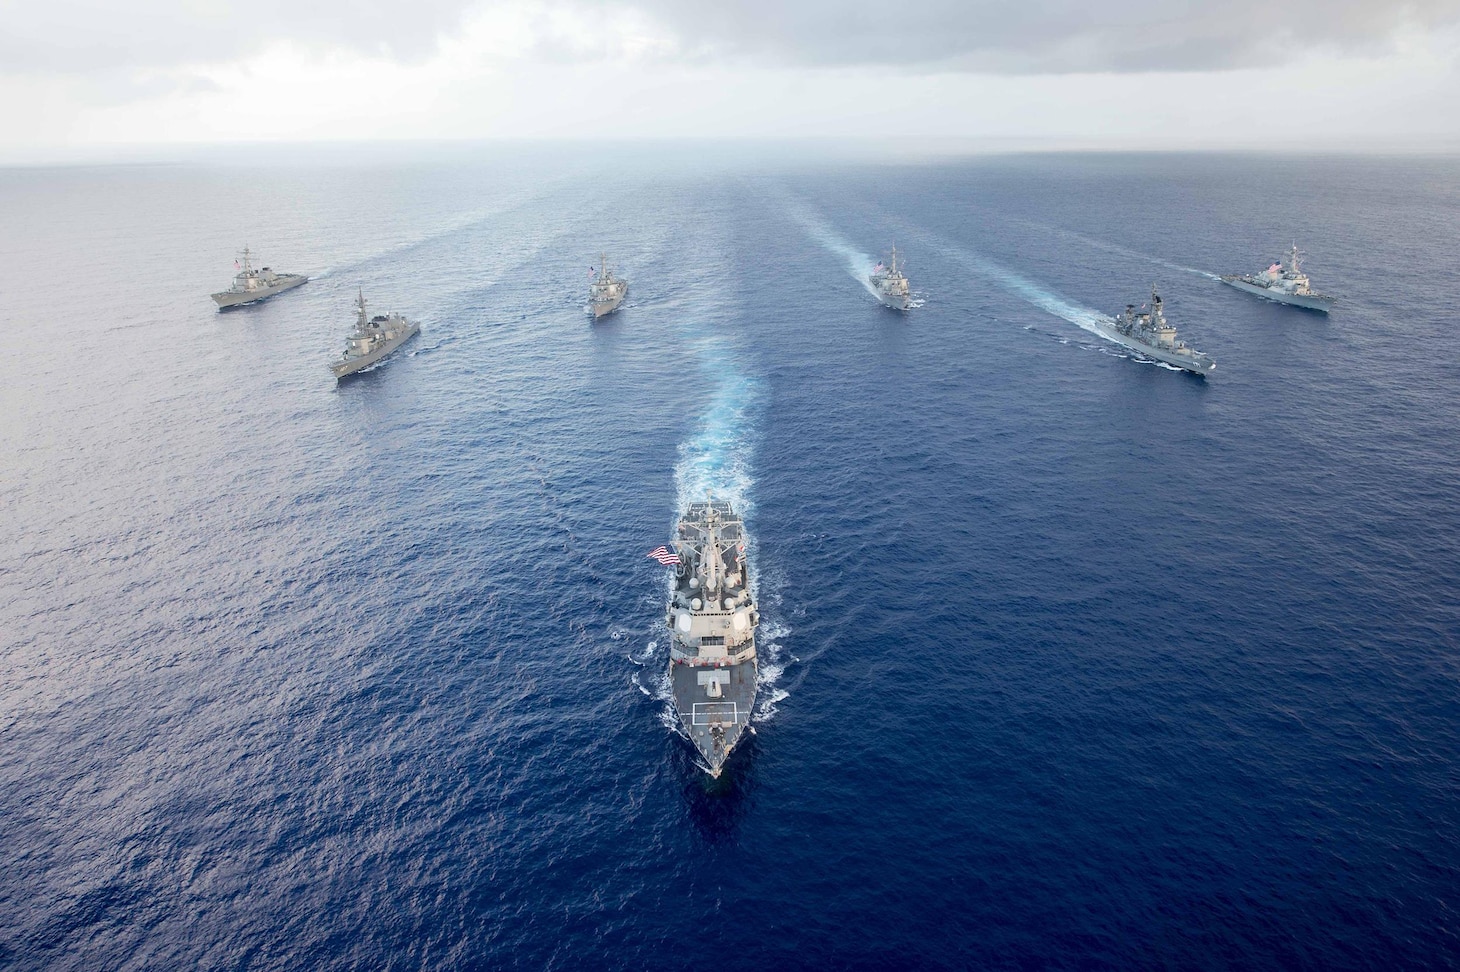 The Arleigh Burke-class guided-missile destroyer USS Mustin (DDG 89) leads U.S. Navy and Japan Maritime Self-Defense Force (JMSDF) ships in formation during MultiSail 17. MultiSail 17 is a bilateral training exercise improving interoperability between the U.S. and Japanese forces.  This exercise benefits from realistic, shared training enhancing our ability to work together to confront any contingency. 